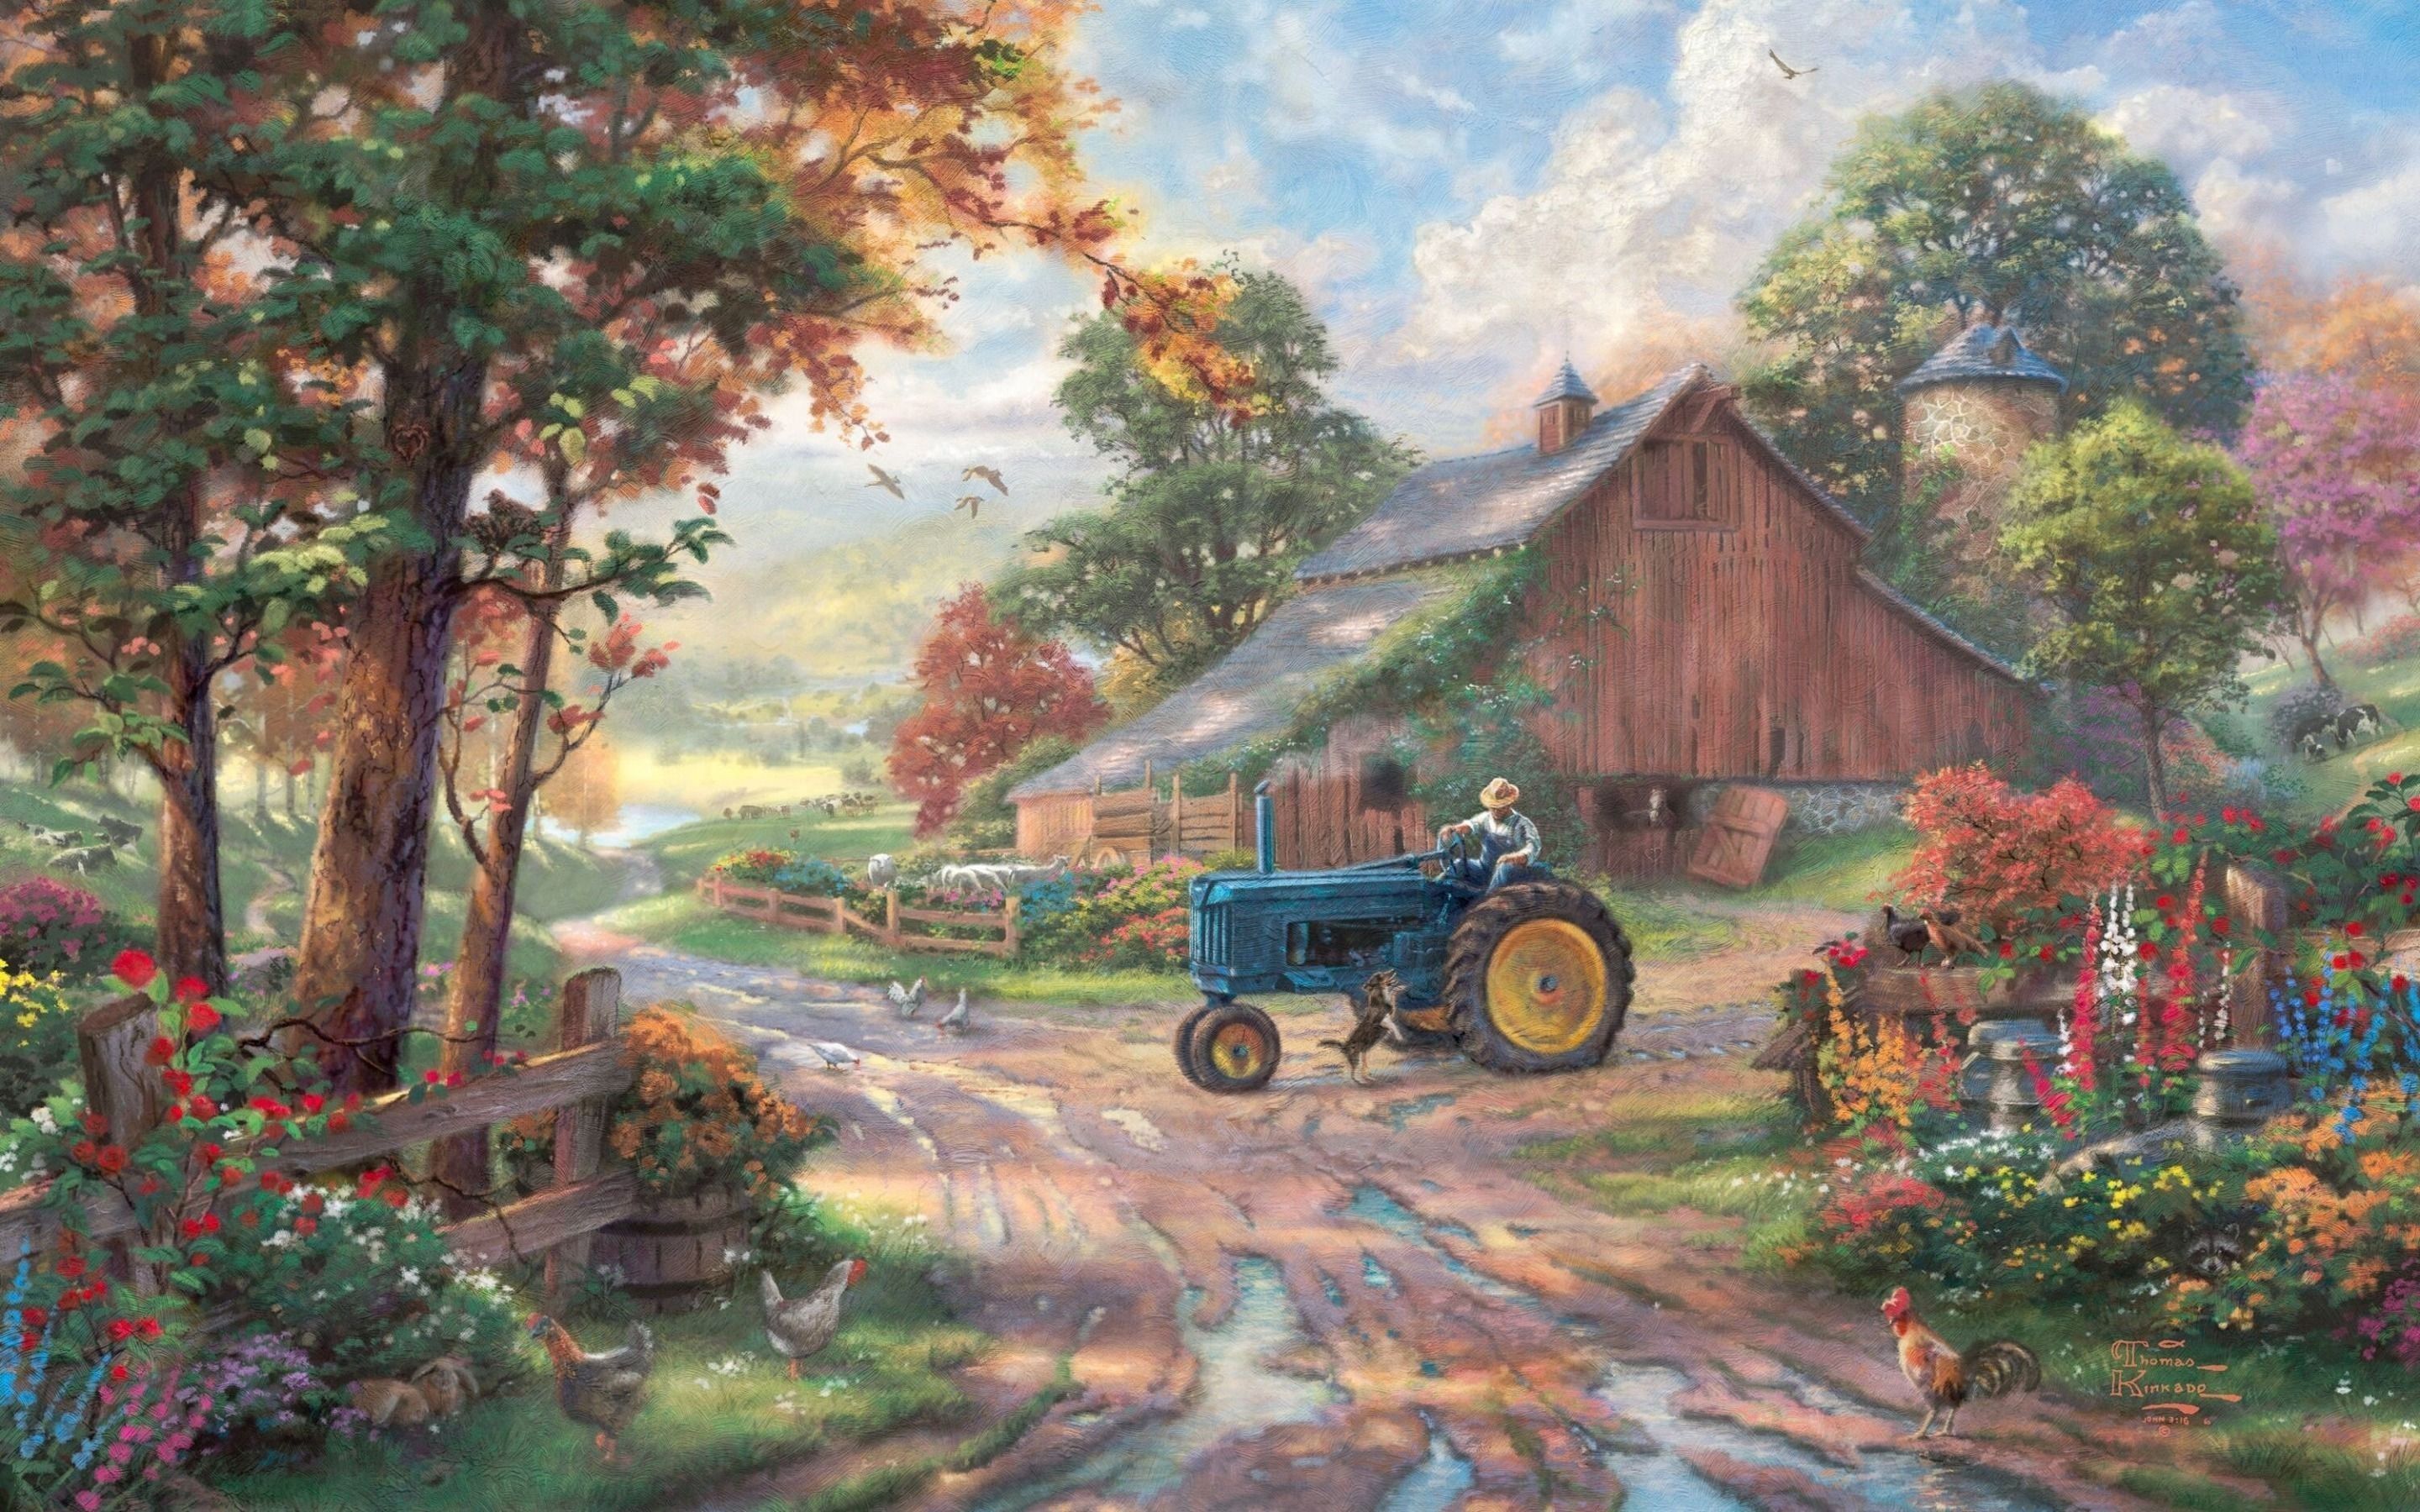 Download wallpaper thomas kinkade, summer heritage, american artist, summer effects for desktop with resolution 2880x1800. High Quality HD picture wallpaper